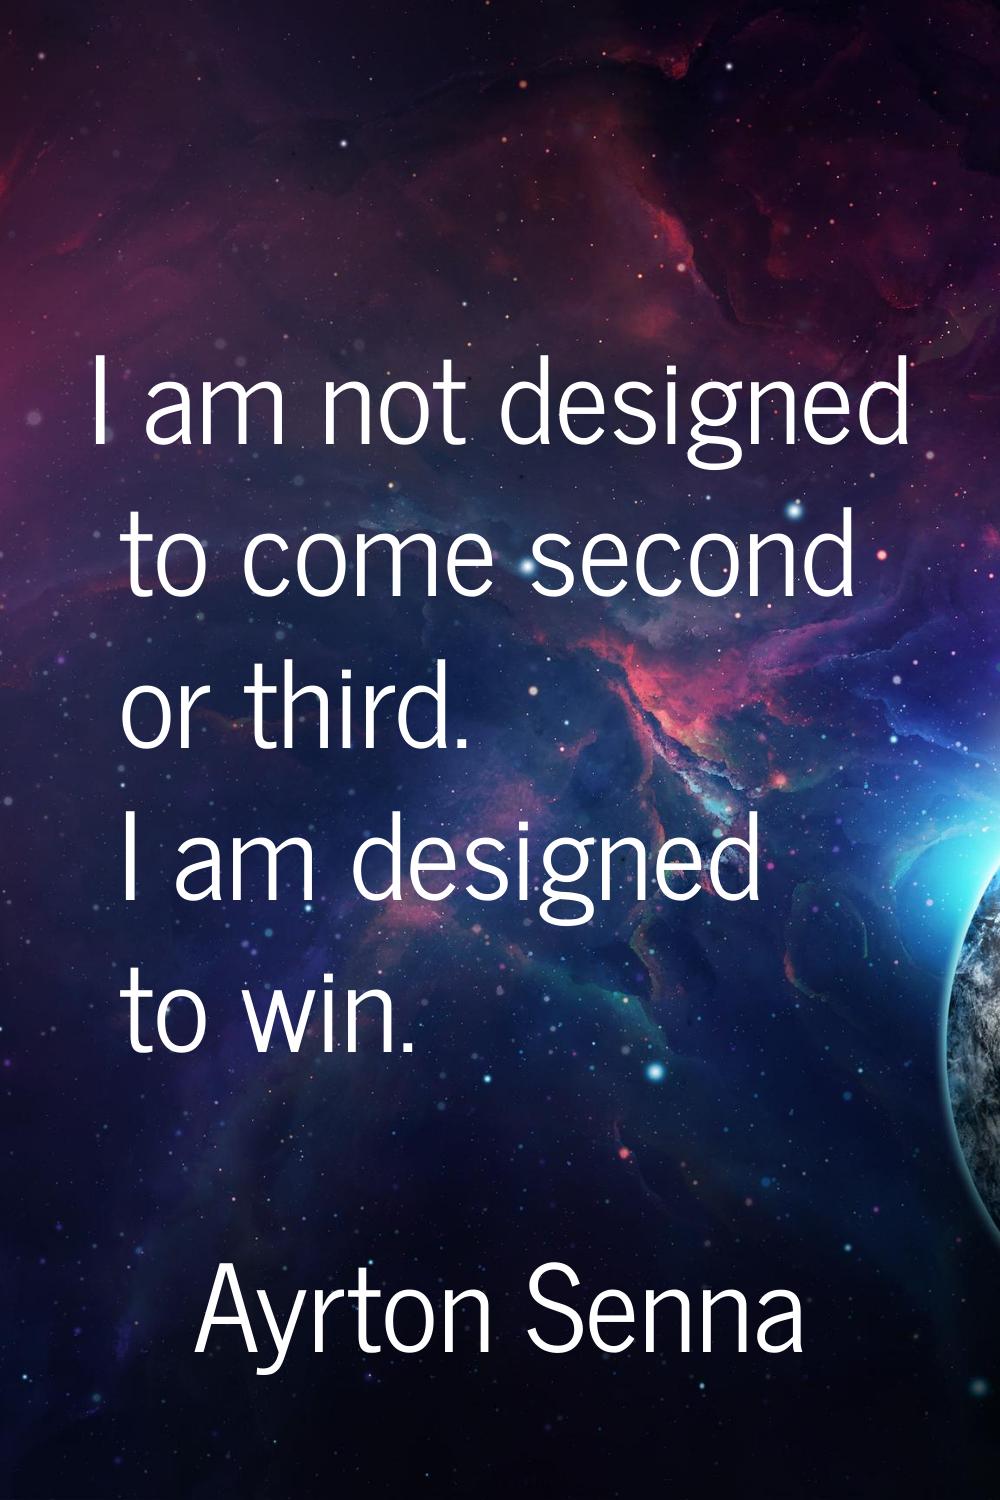 I am not designed to come second or third. I am designed to win.